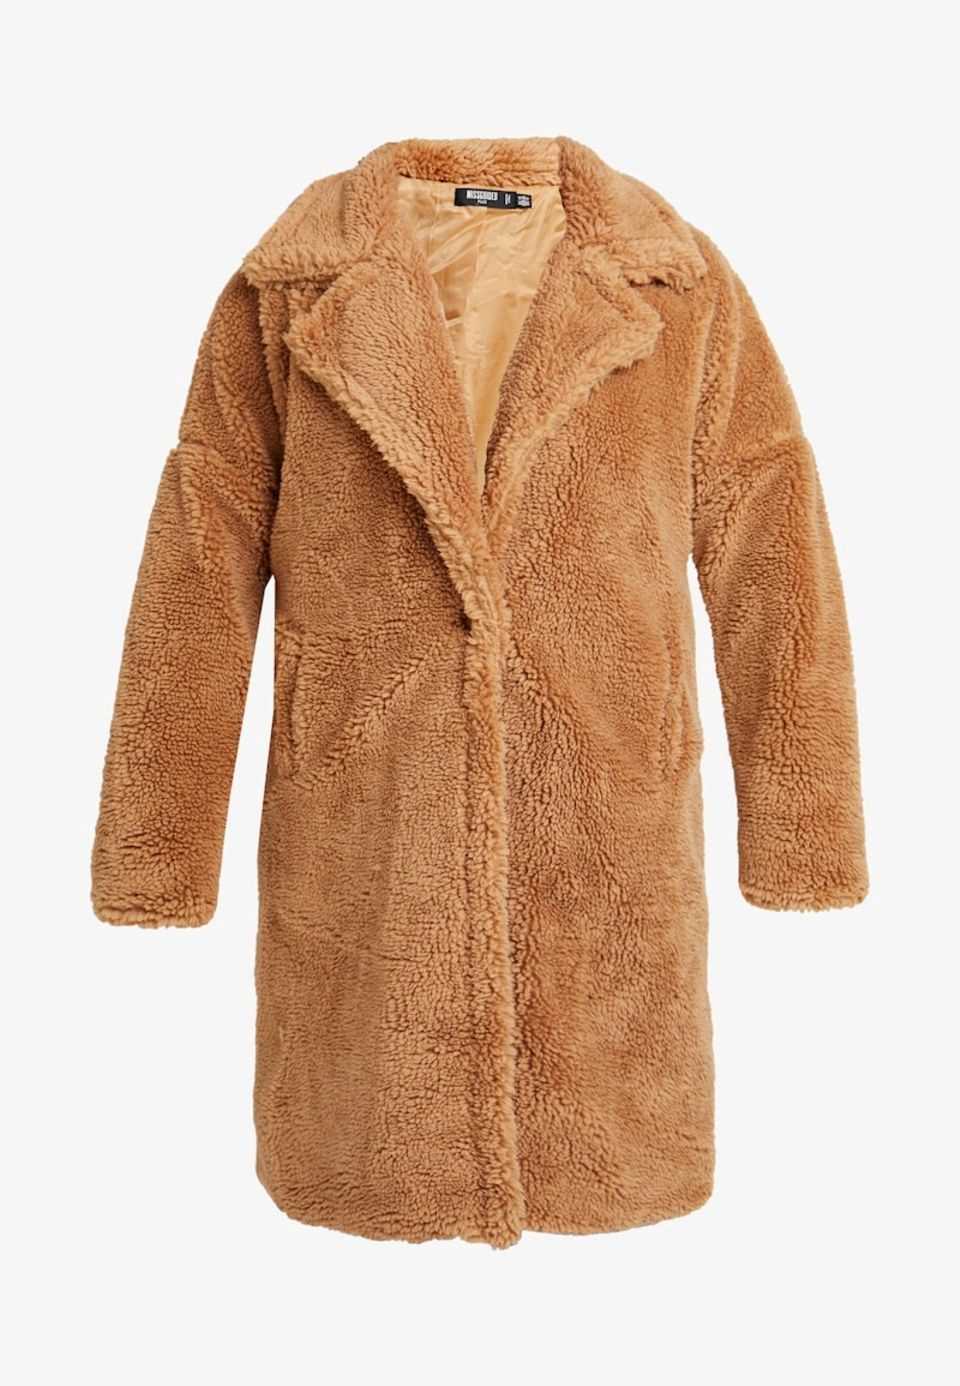 Teddy coat from Missguided Plus